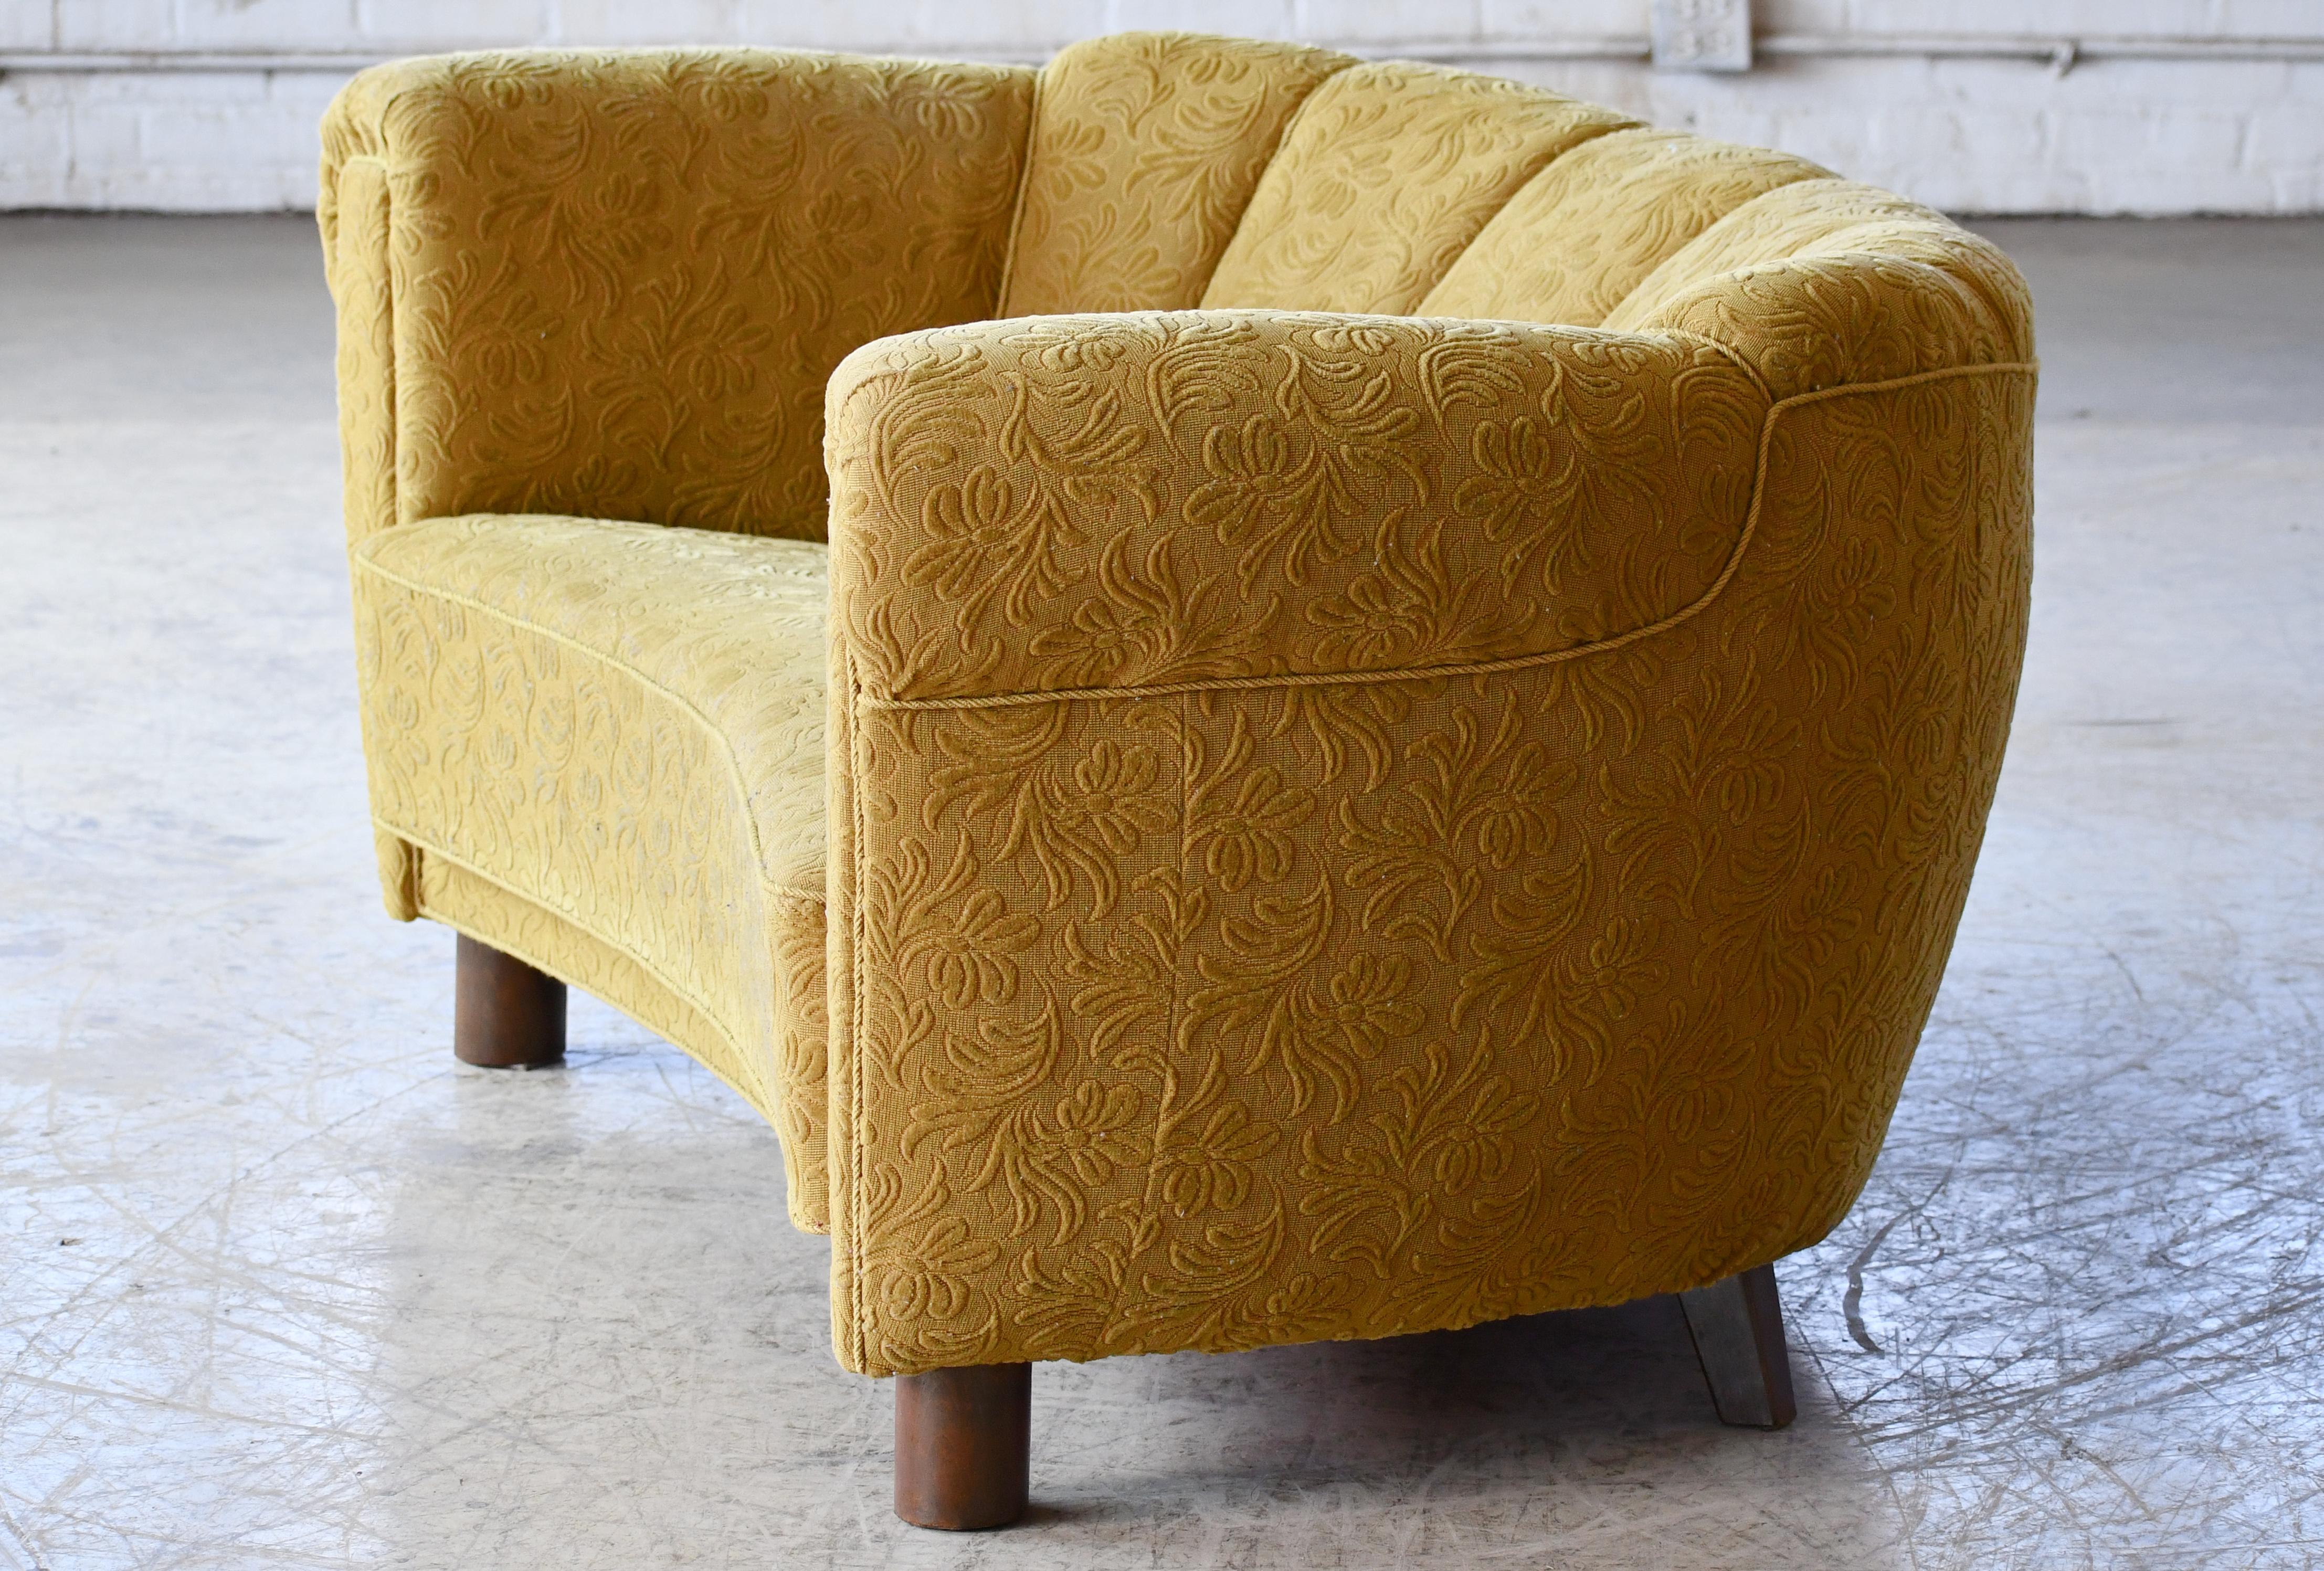 Danish Art Deco Curved Sofa or Loveseat 1930's For Sale 1